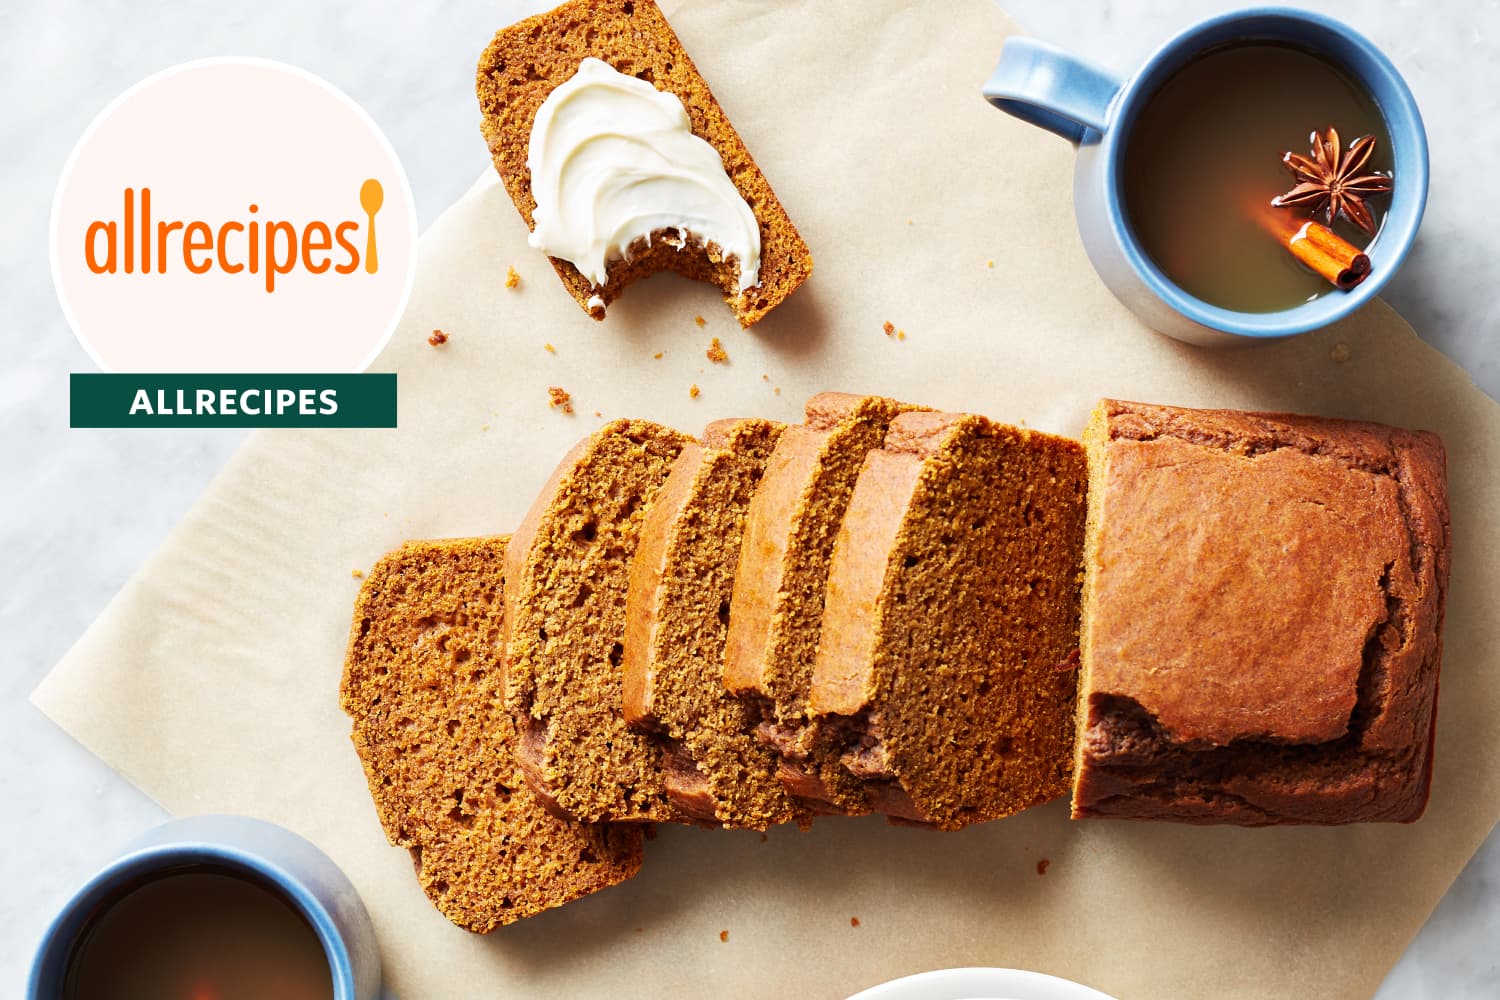 This Spiced Pumpkin Bread Is So Good, I Eat It Straight from the Pan